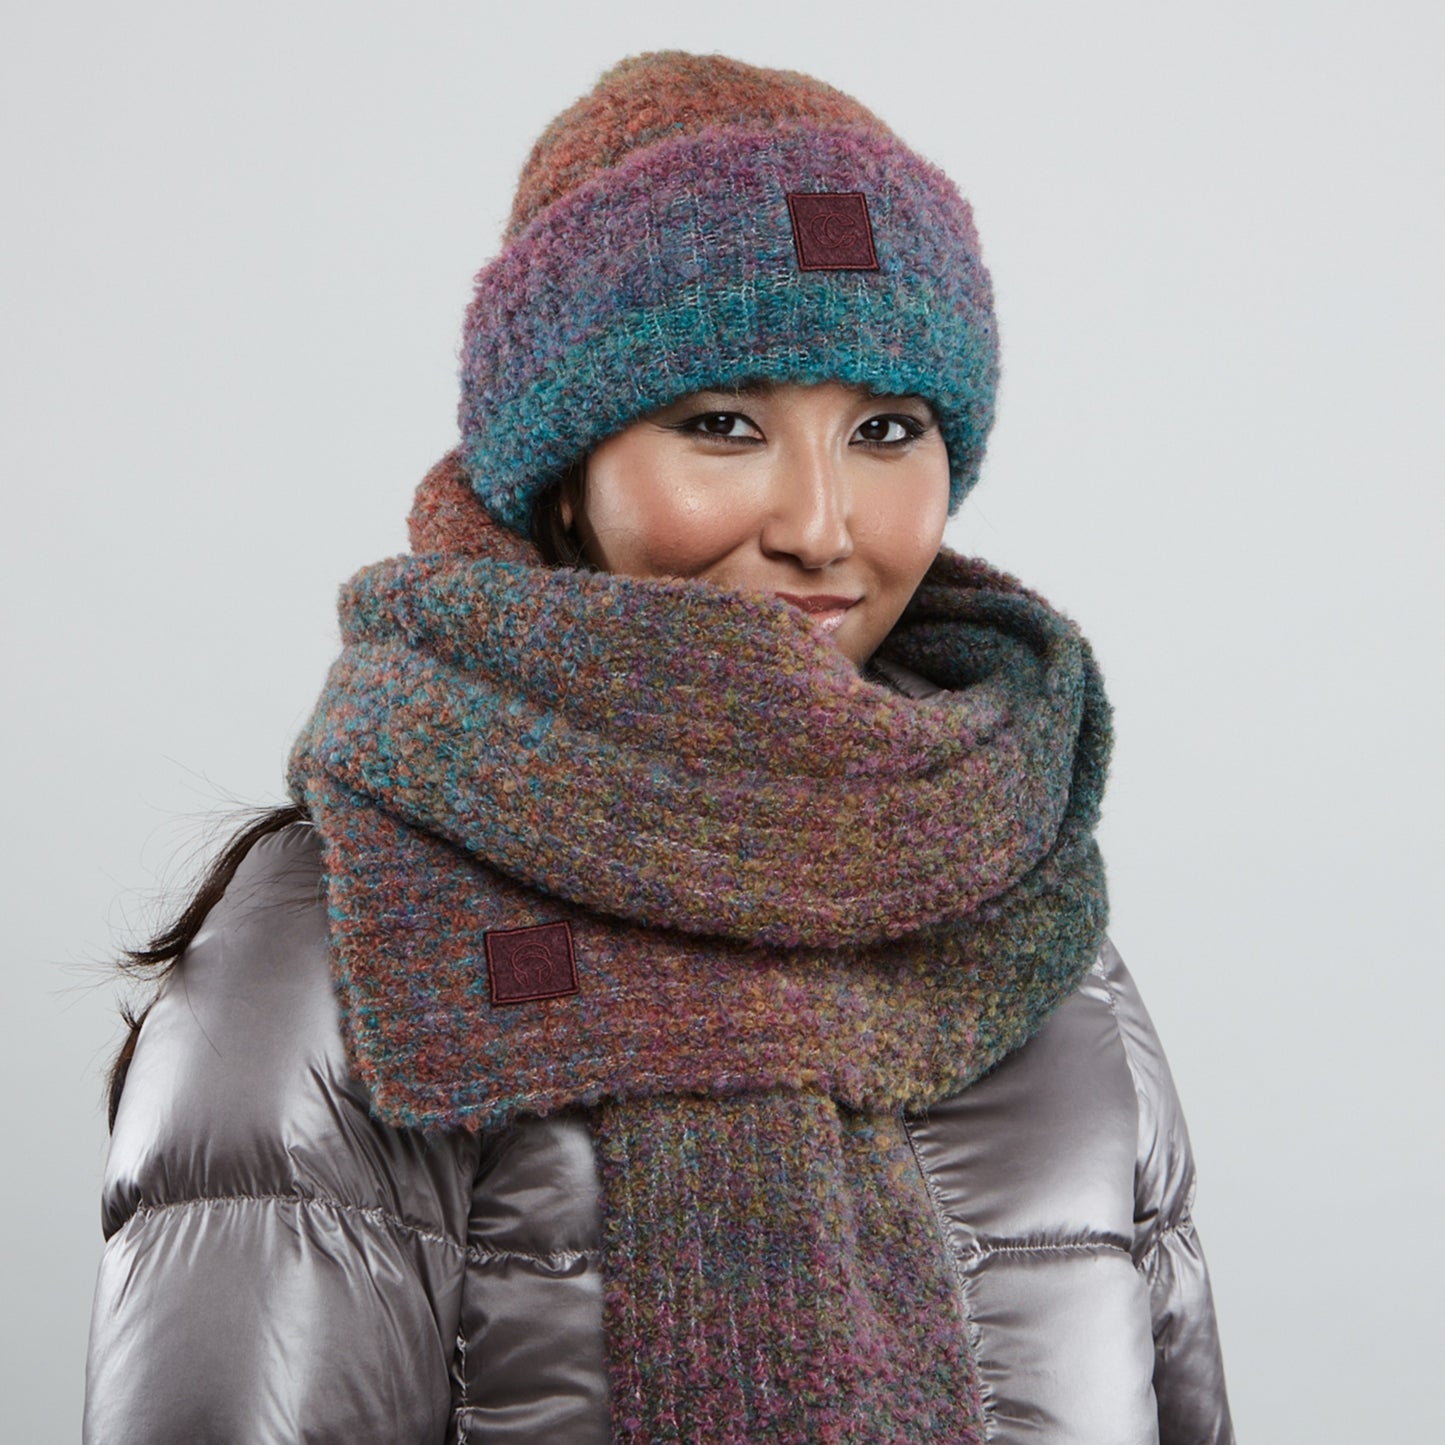 ECO Tempest Scarf Style: 233033